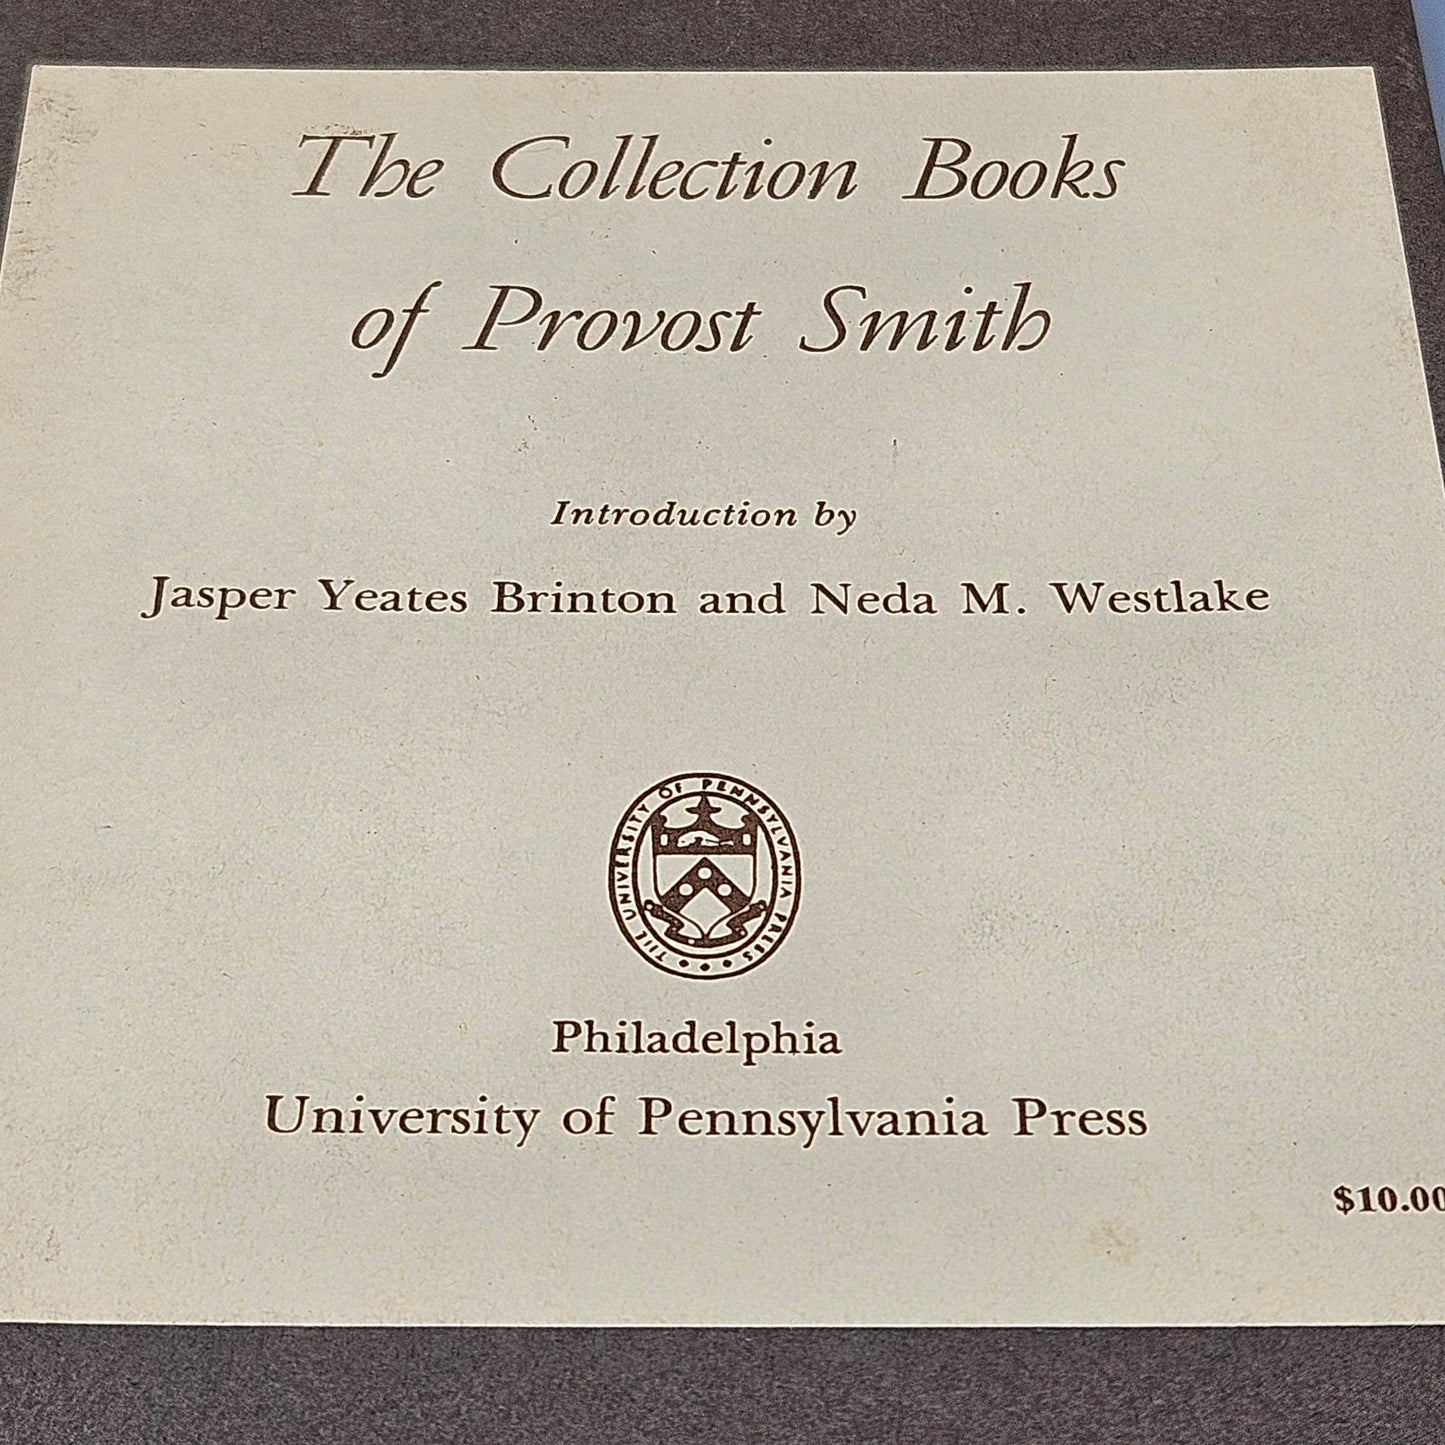 Book: The Collection Books of Provost Smith University of Pennsylvania Press 1964